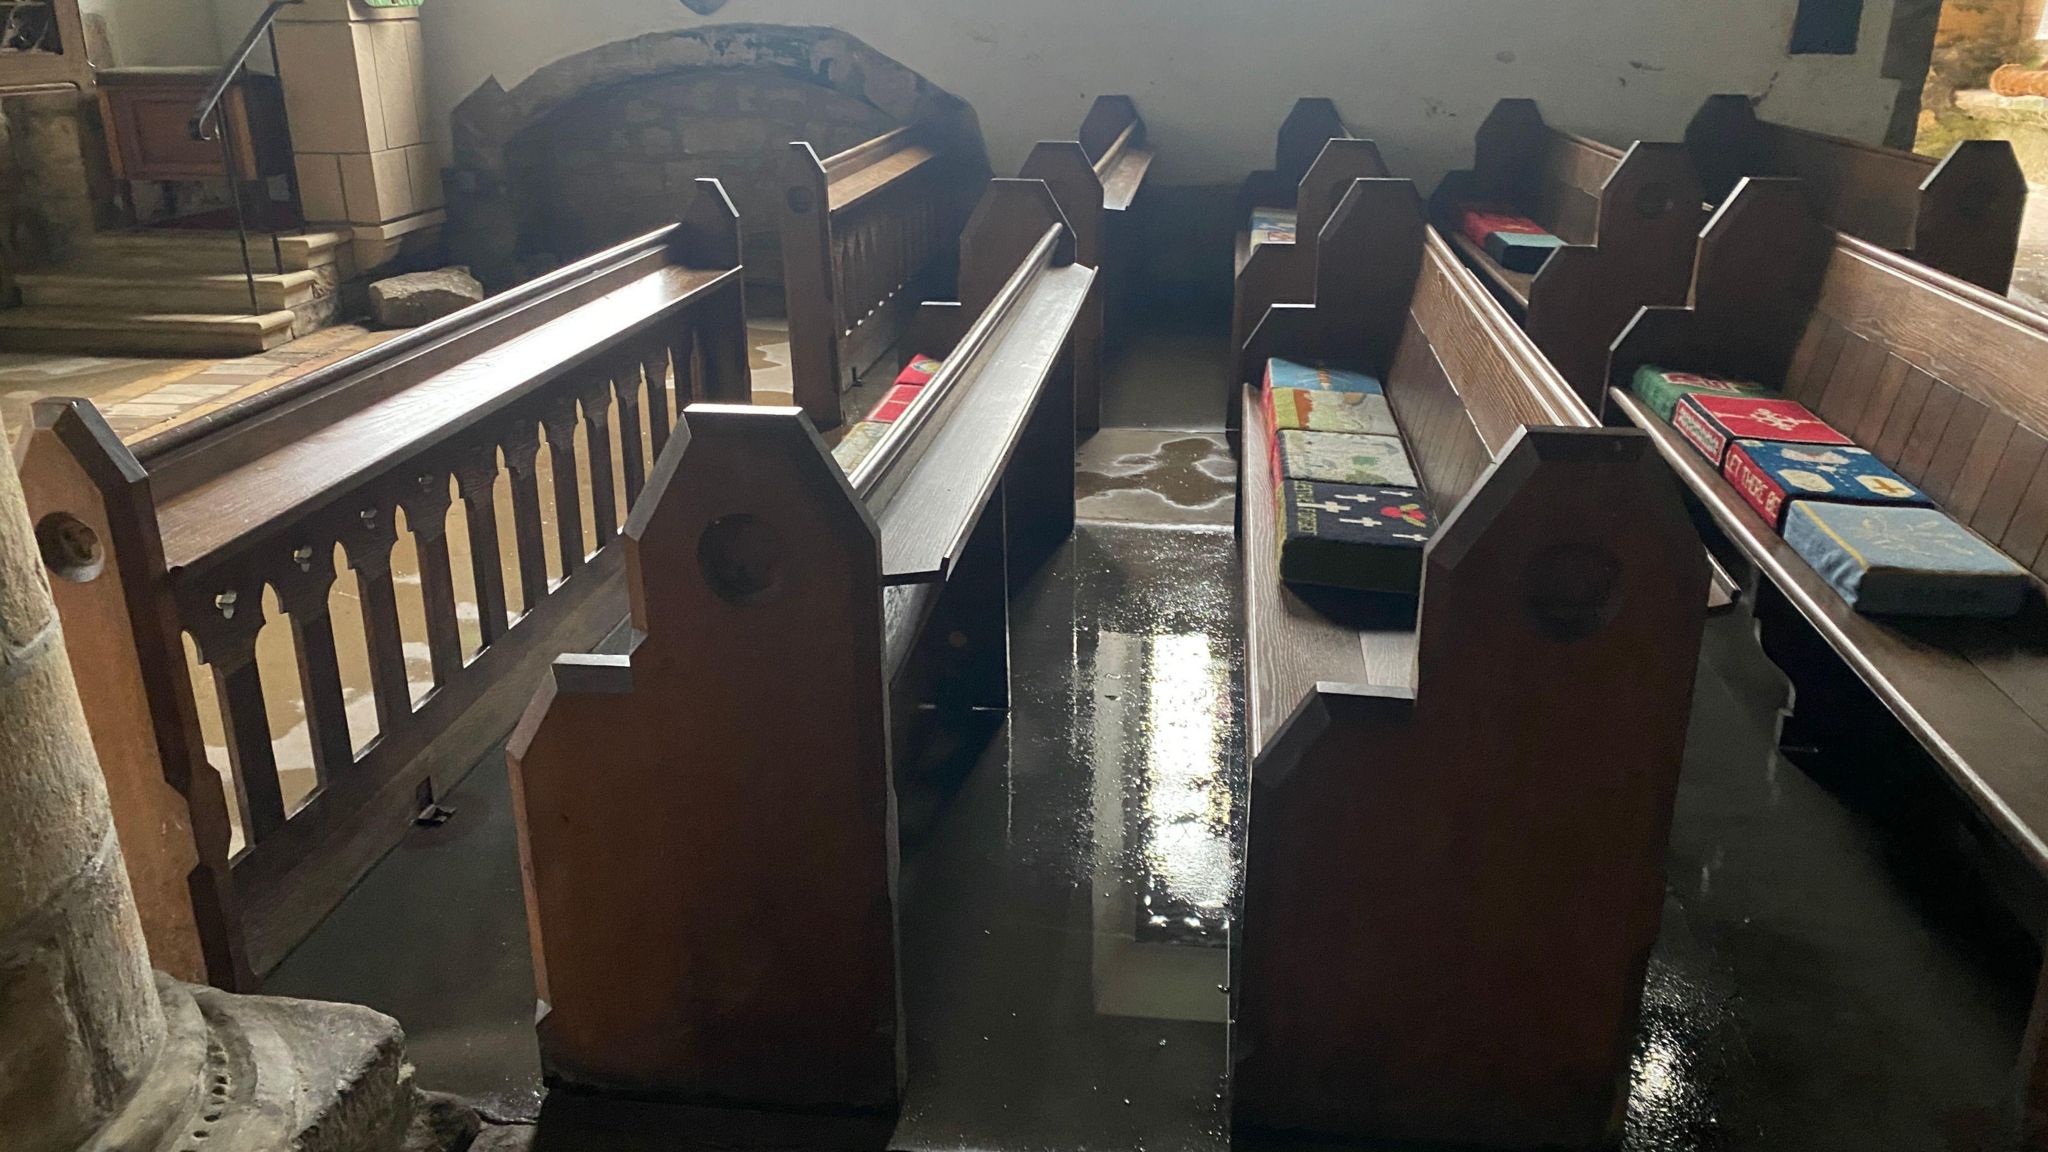 Rows of pews with water on the floor